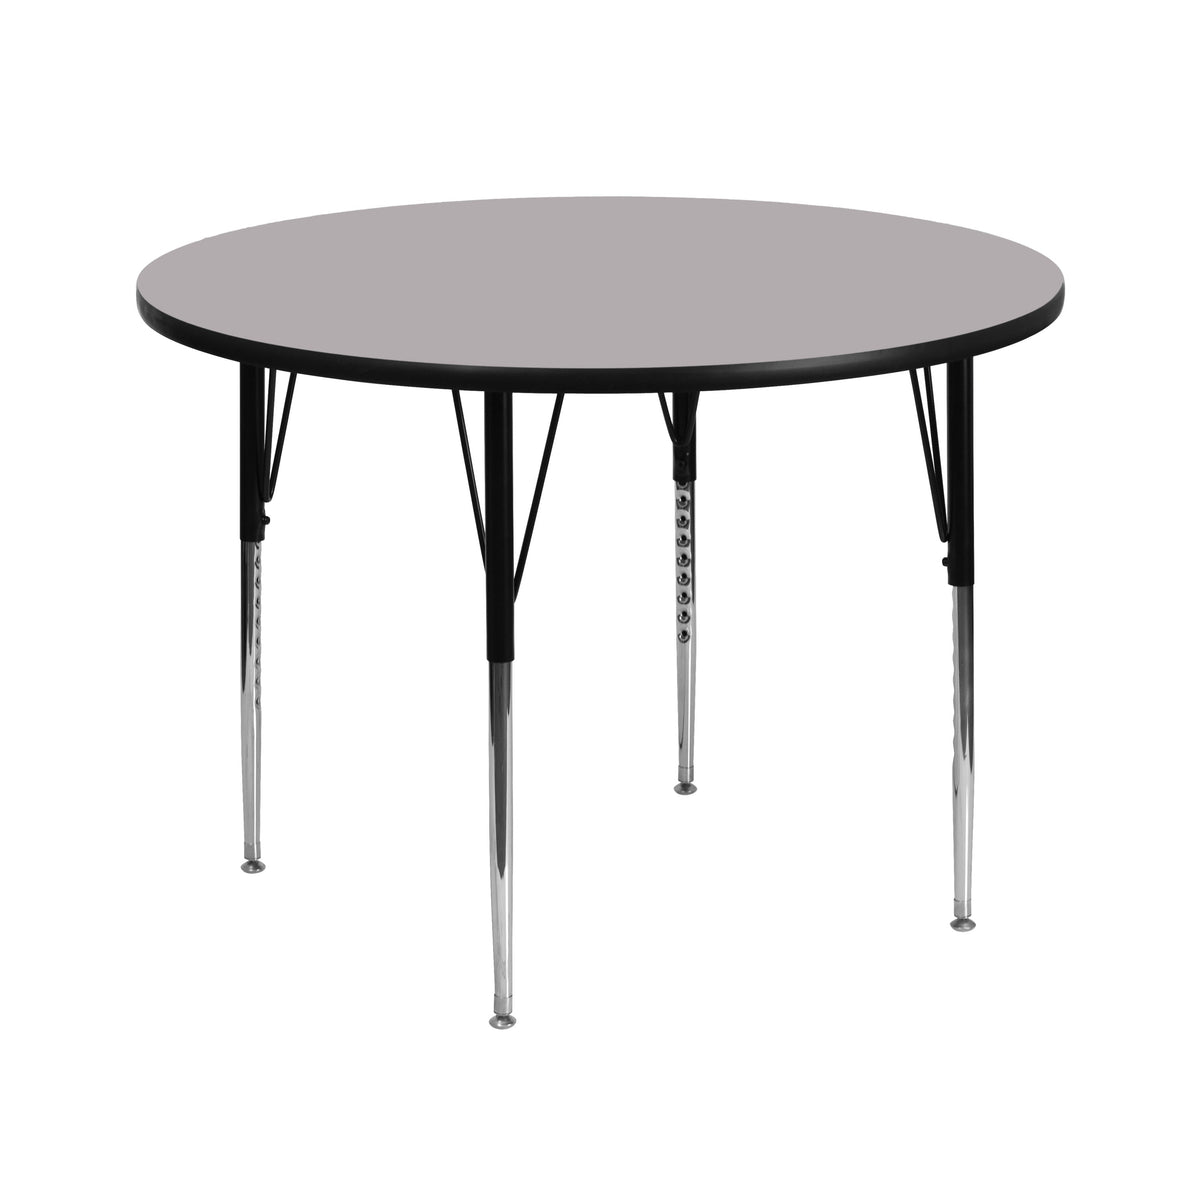 Gray |#| 42inch Round Grey Thermal Laminate Activity Table - Standard Height Adjustable Legs